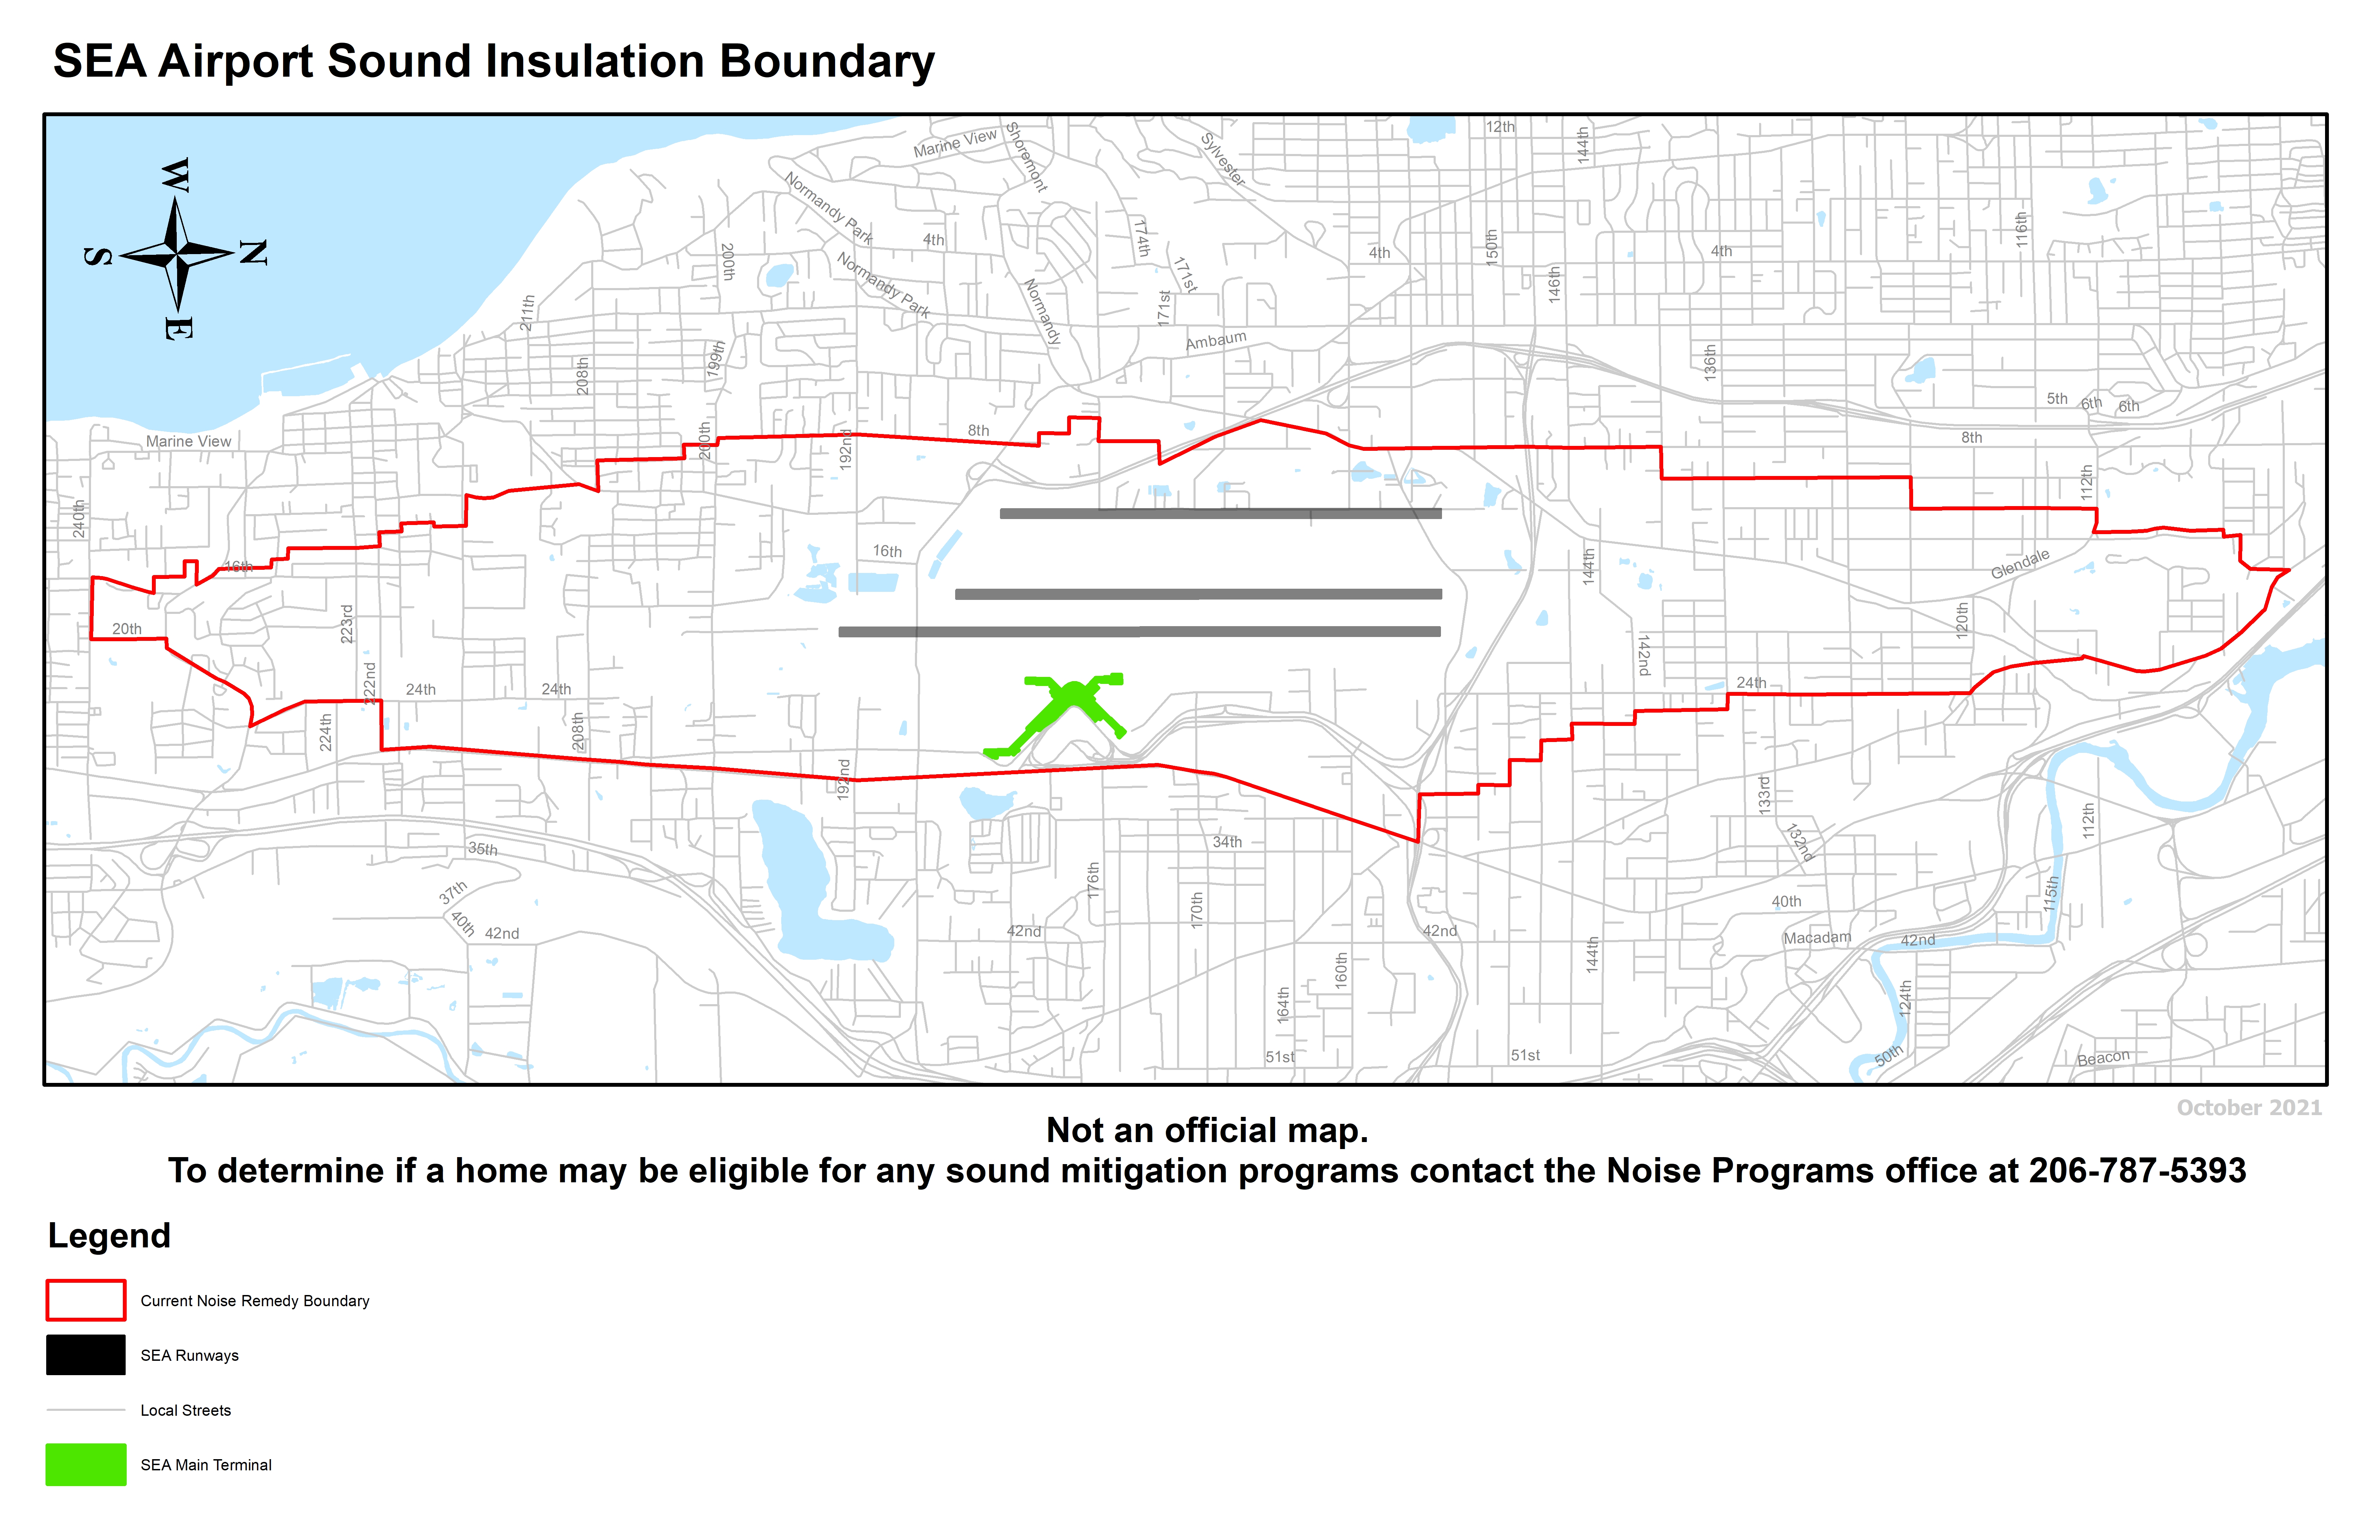 sample map of sound mitigation boundary, not an official map. Contact Noise Programs office for eligibility details